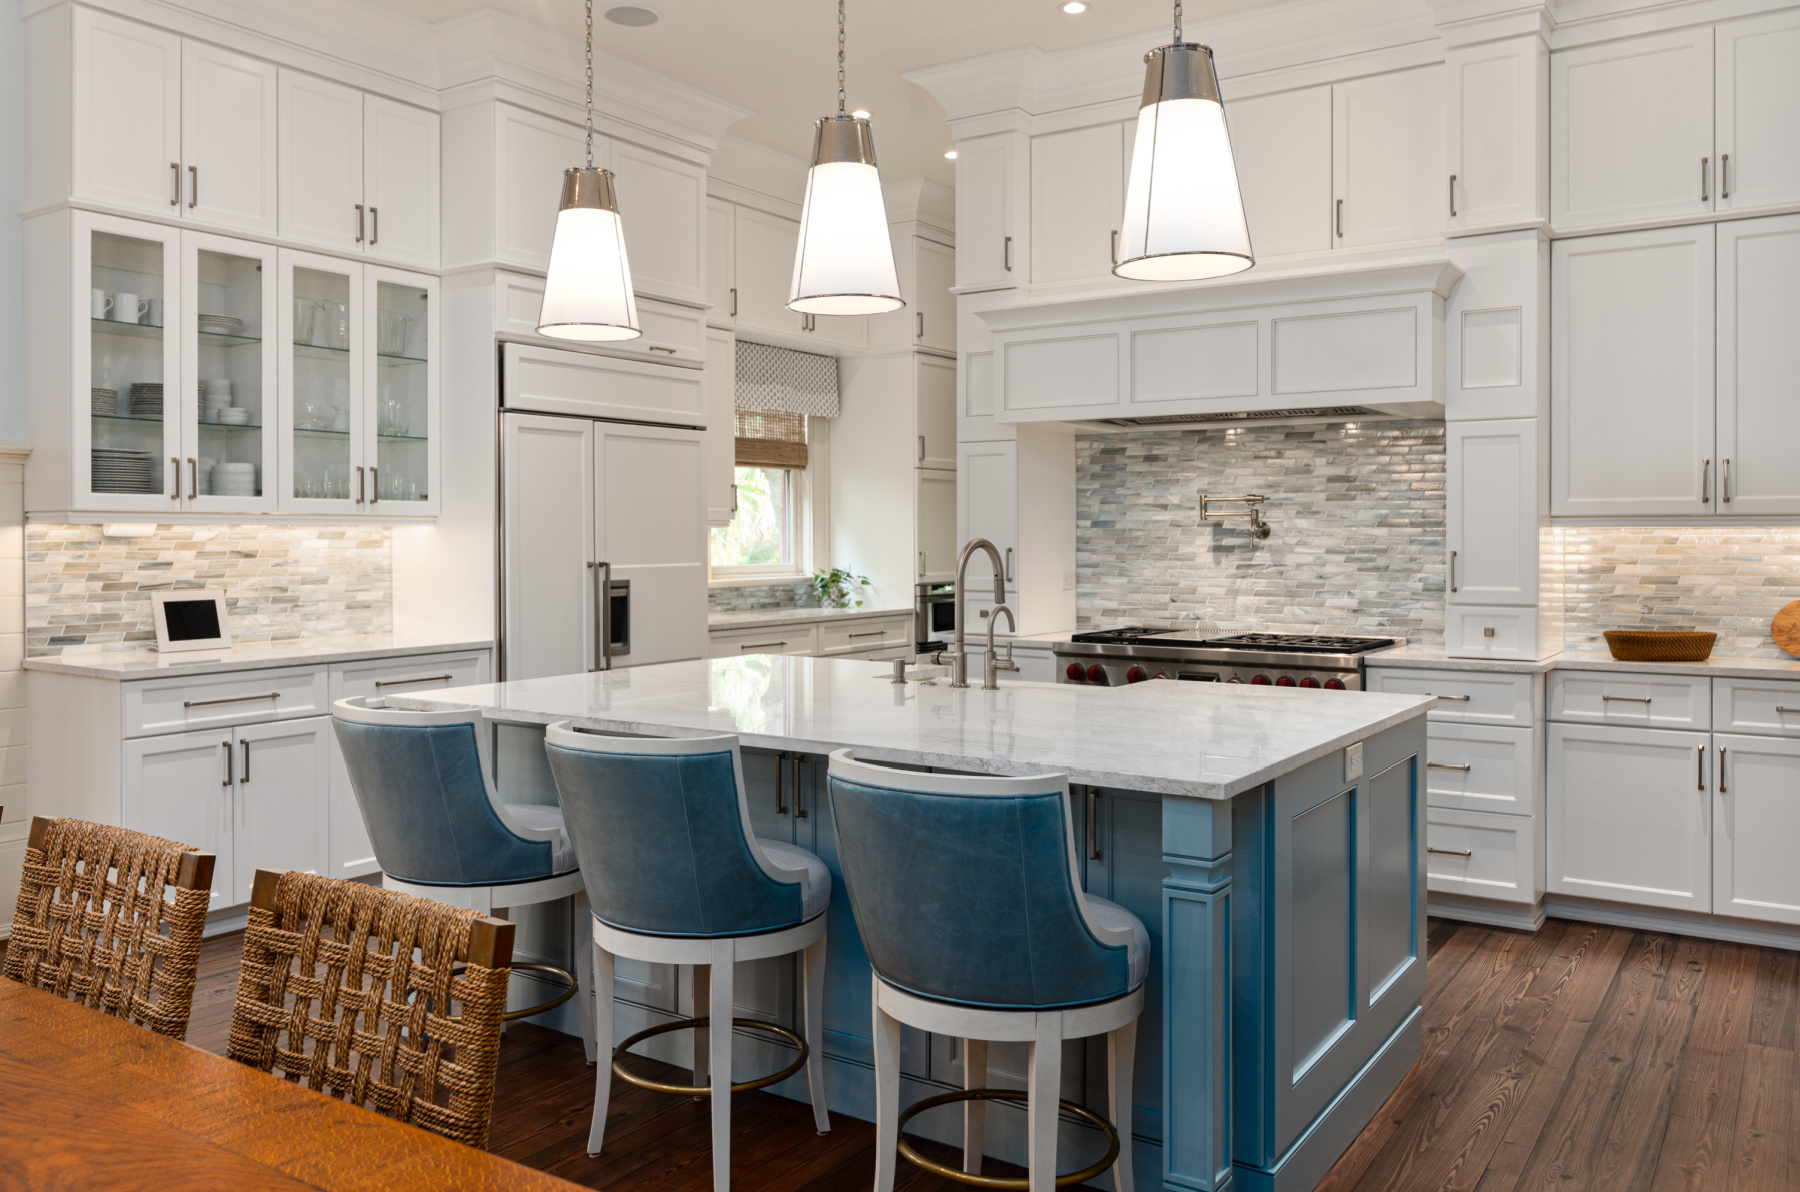 5 Common Kitchen Remodeling Mistakes